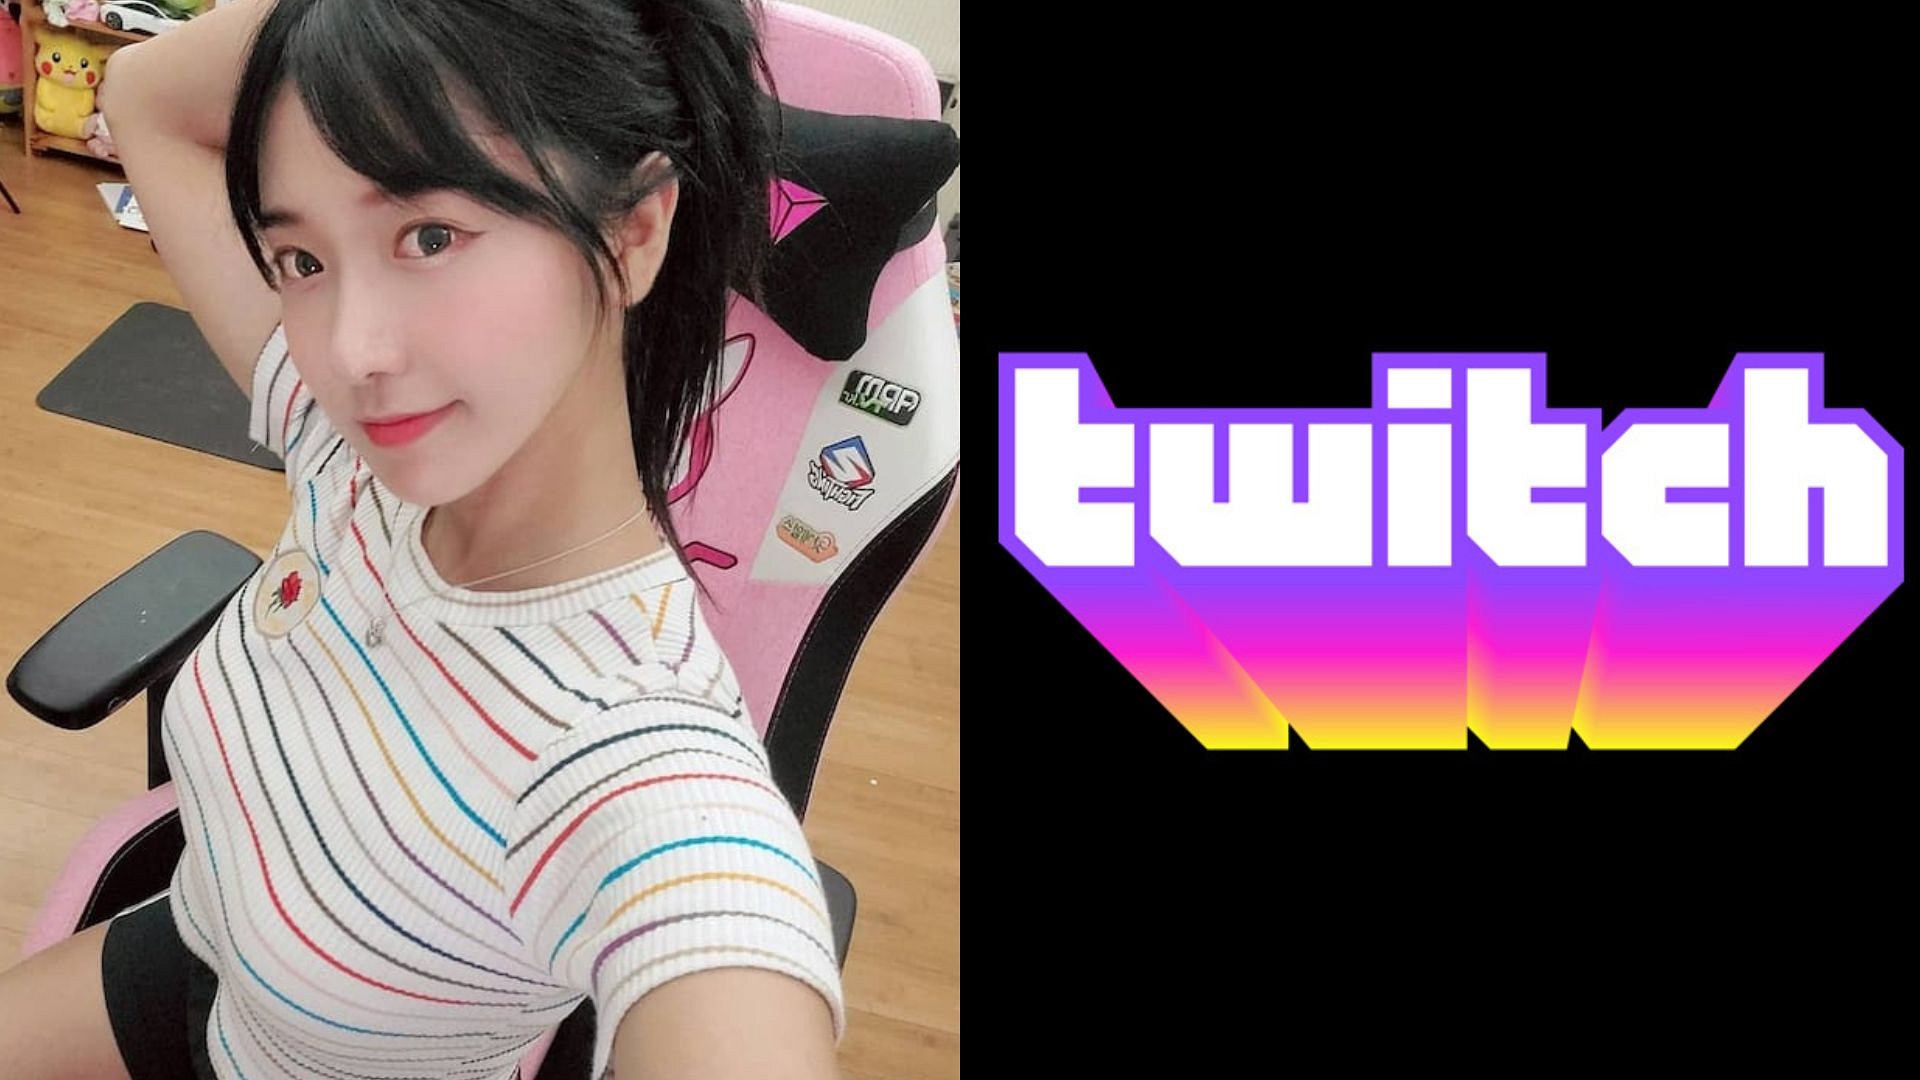 Twitch streamer Jinnytty asked to pay $2500 to continue streaming